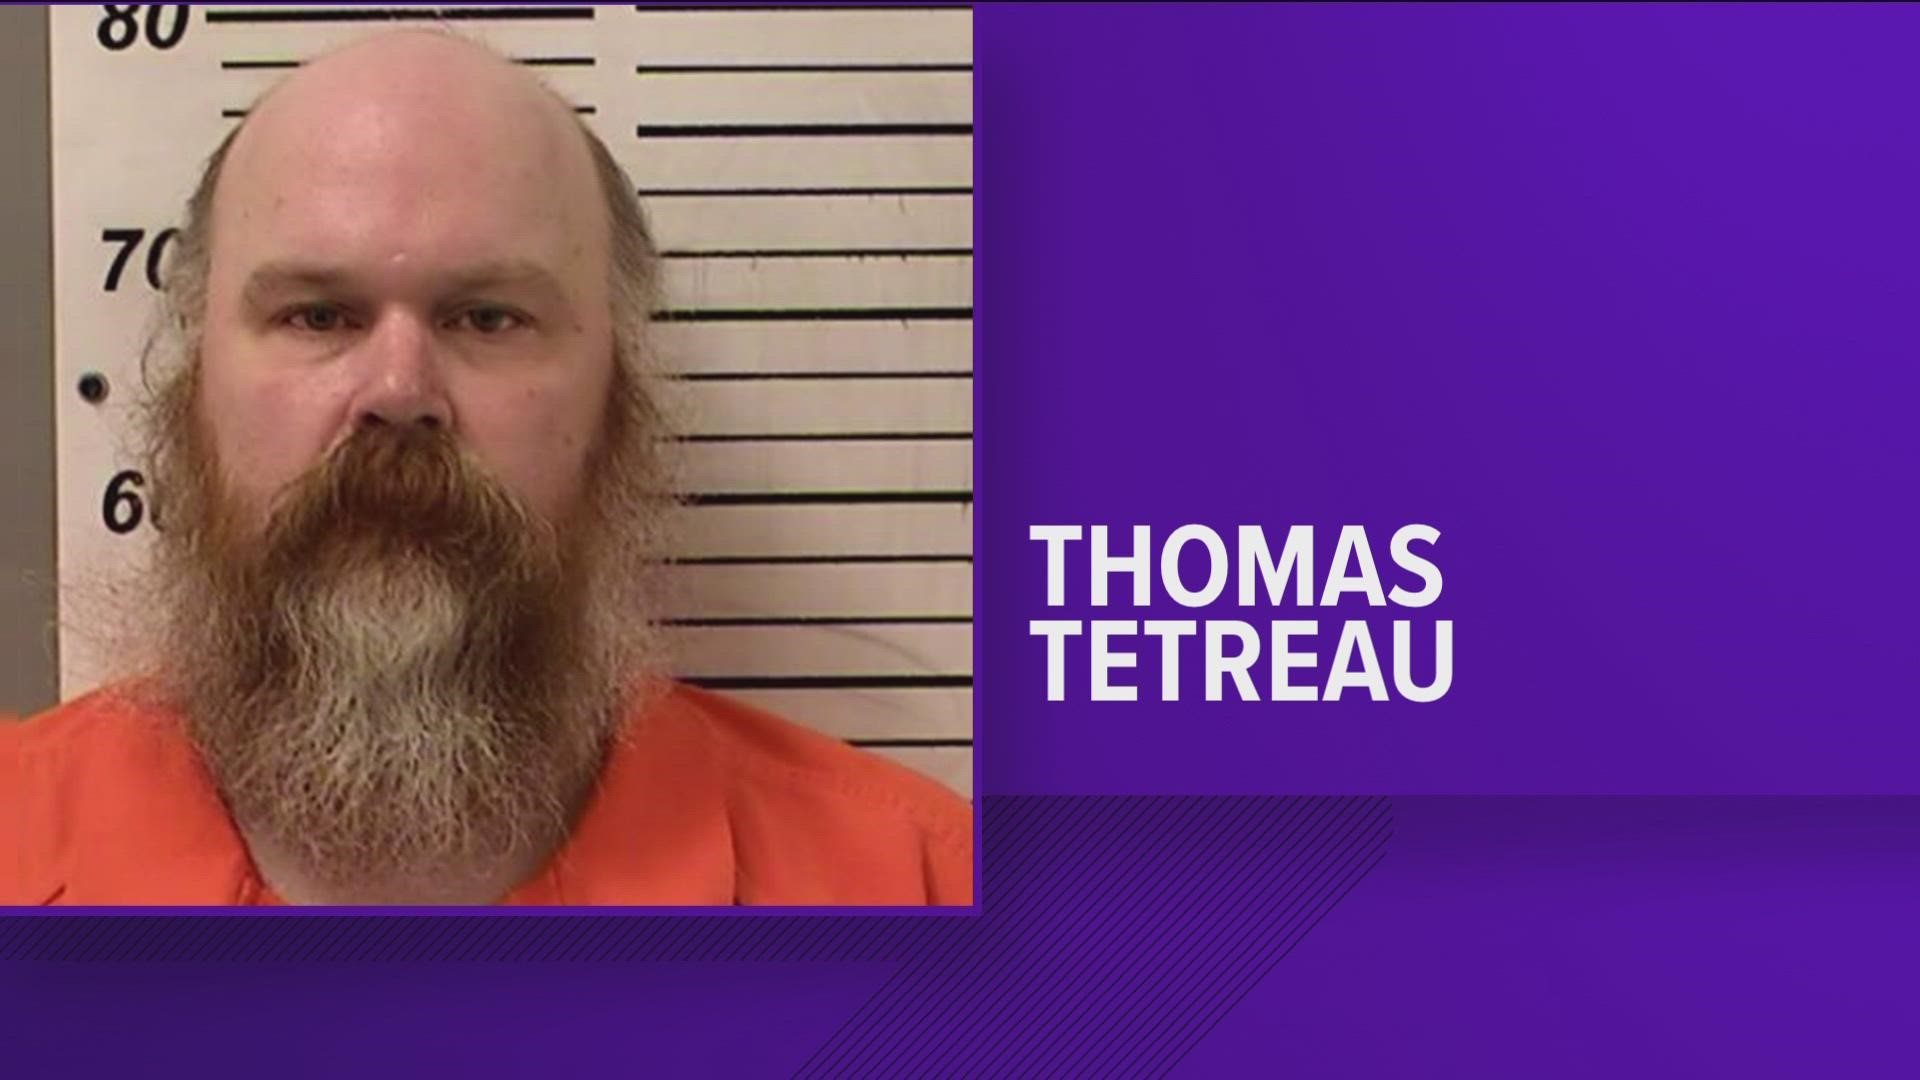 Thomas Tetreau pleaded guilty to two counts of received and distribution of child pornography.